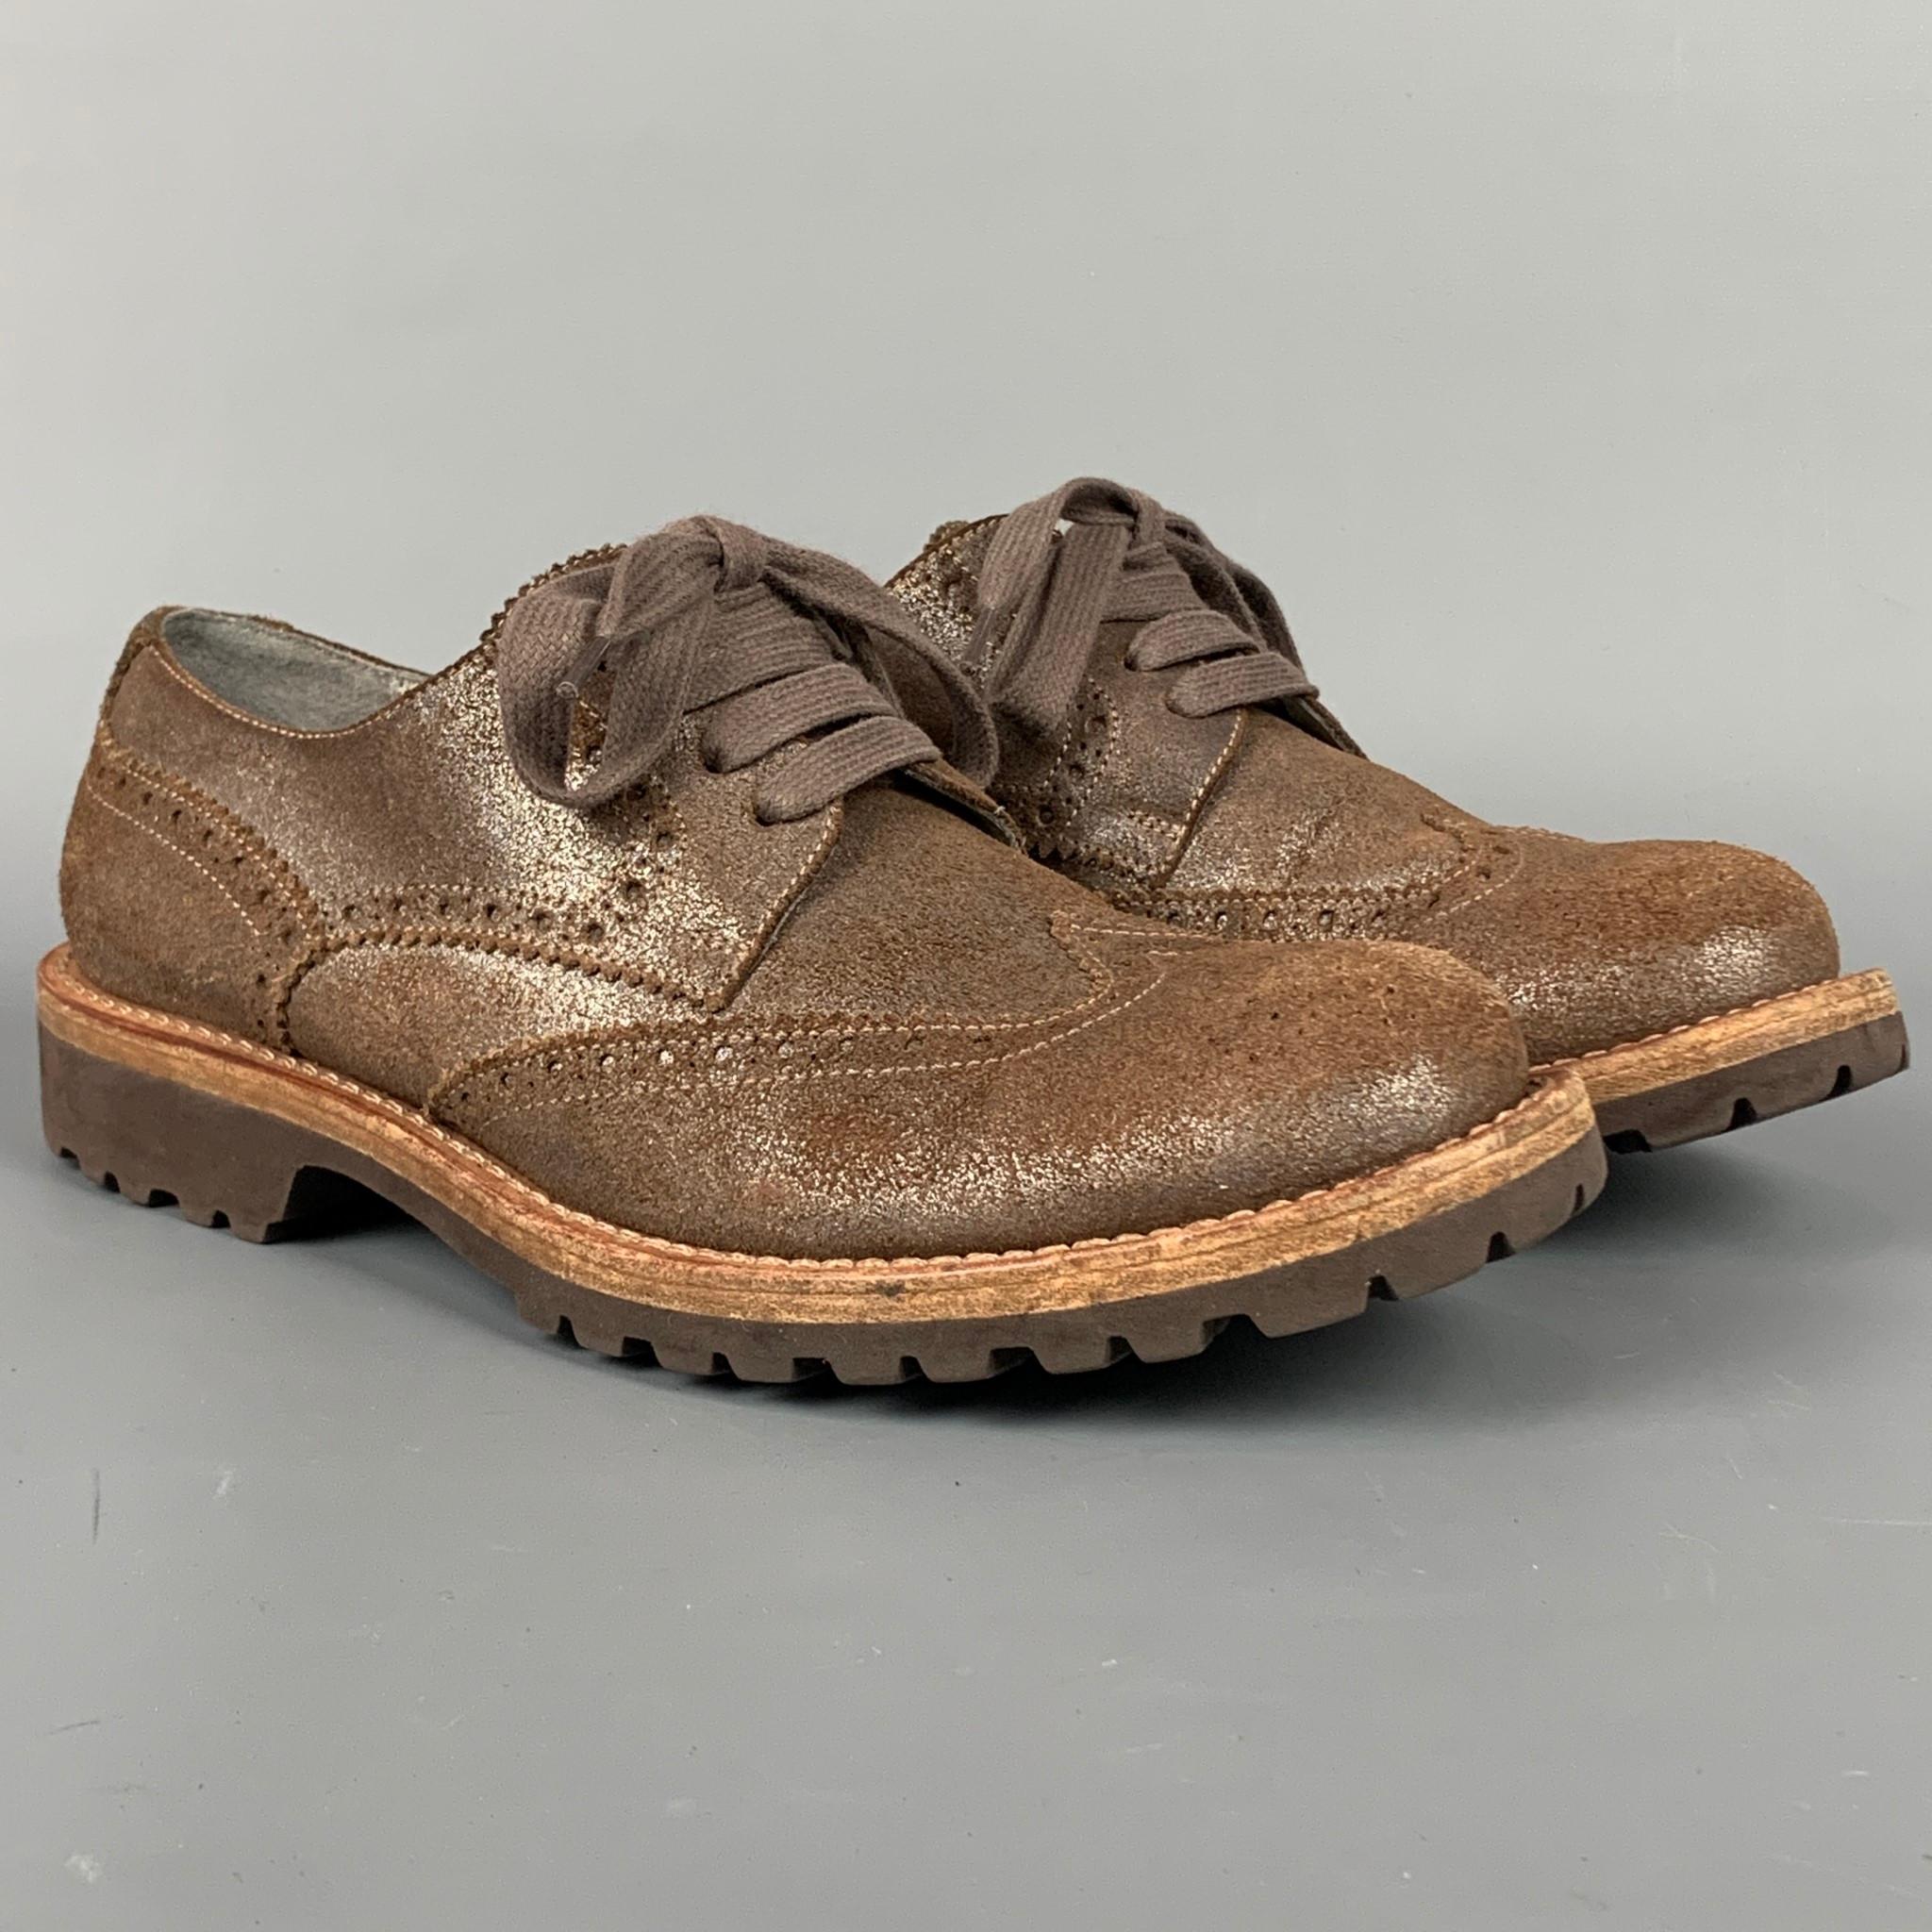 BRUNELLO CUCINELLI shoes comes in a brown perforated suede featuring a wingtip style, lux sole, and a lace up closure. Made in Italy.

Very Good Pre-Owned Condition.
Marked: IT 38.5
Original Retail Price: $850.00

Outsole: 10.5 in. x 4 in. 